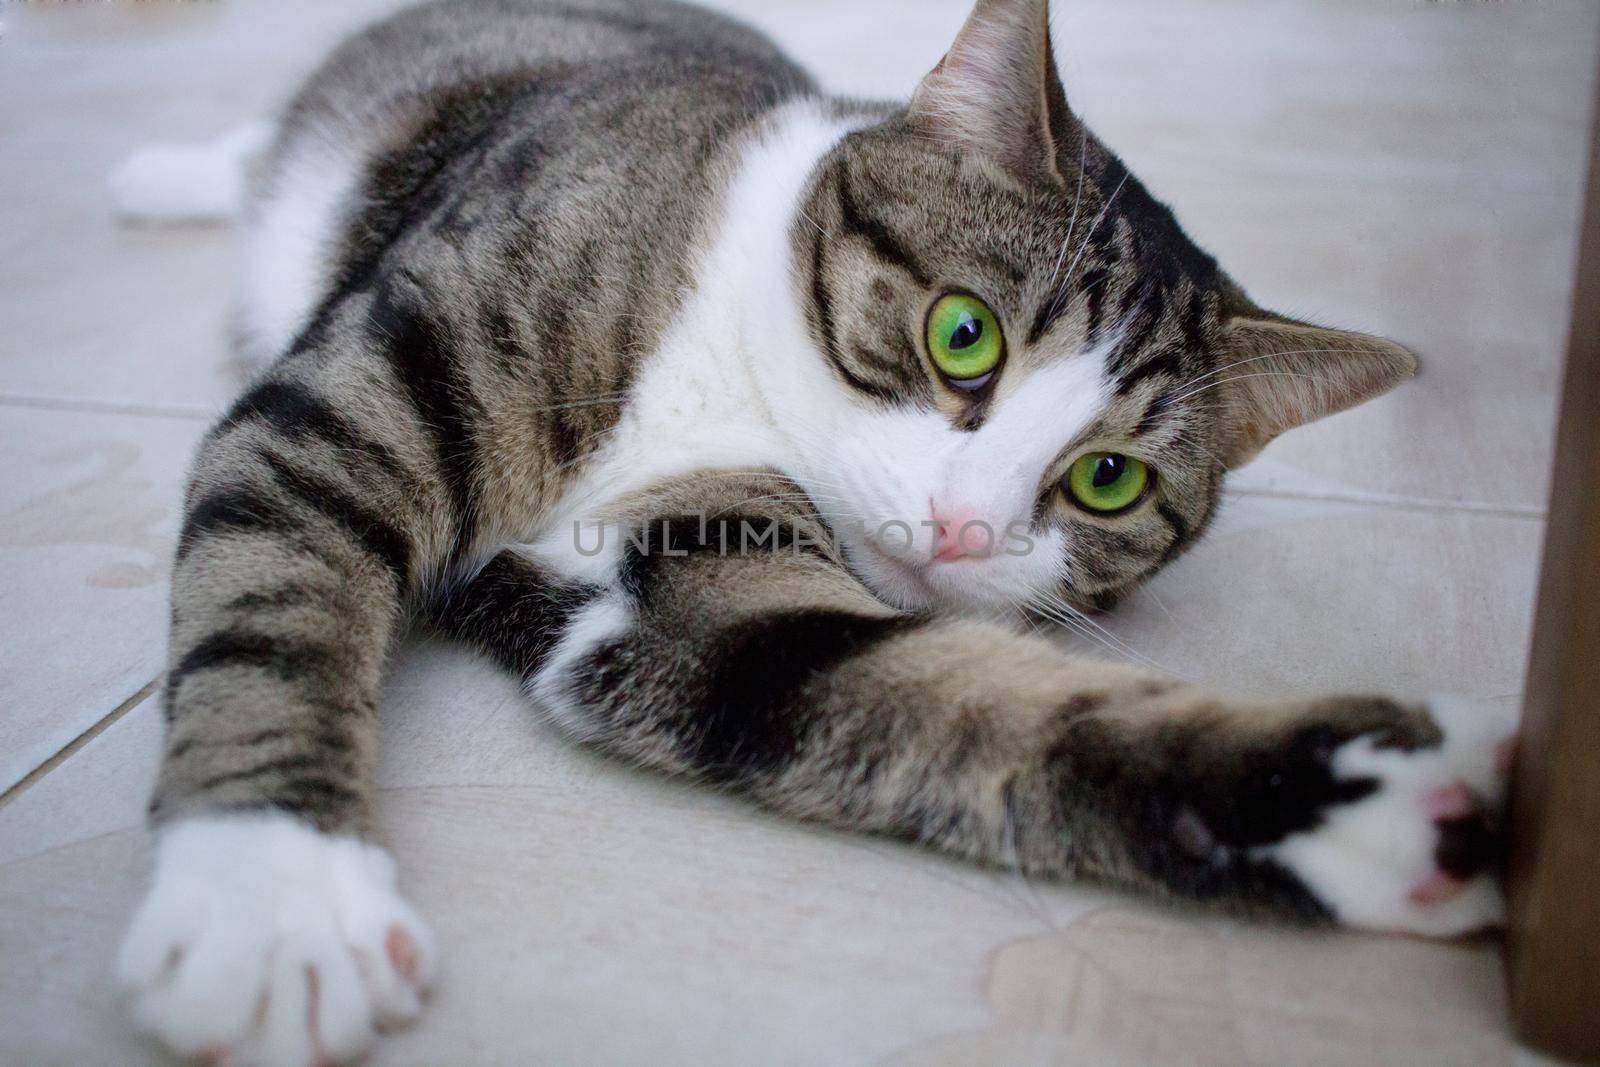 Close-up of domestic pet cat with bright green eyes lying on floor posing and playing